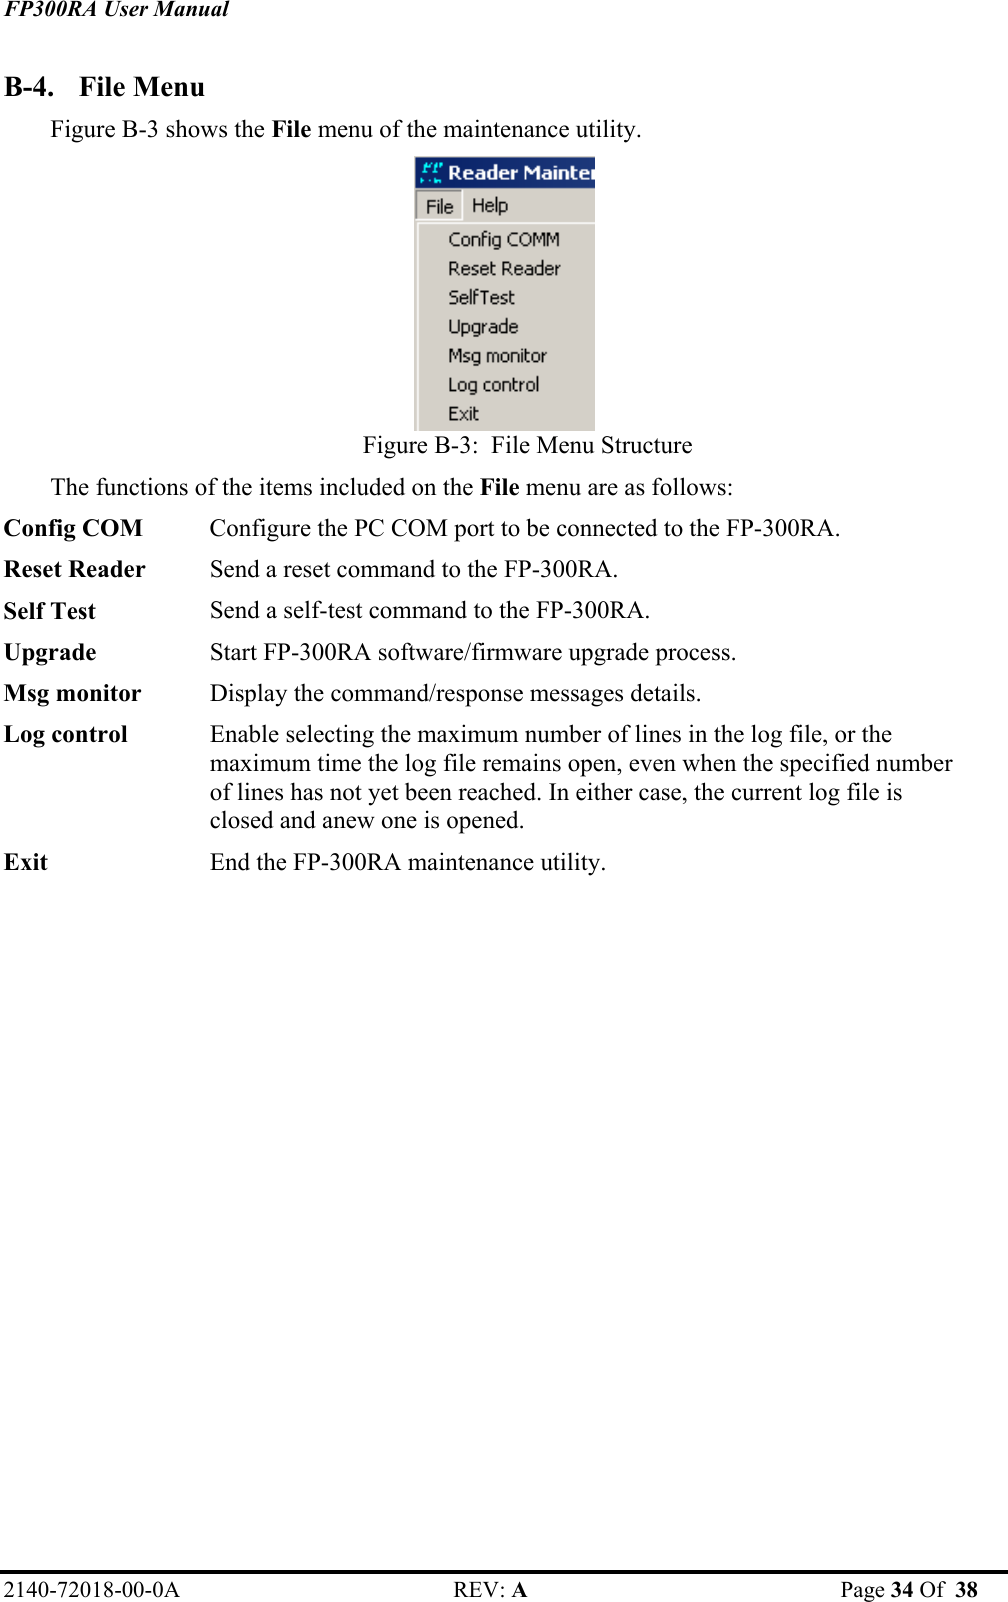 FP300RA User Manual 2140-72018-00-0A REV: A  Page 34 Of  38  B-4. File Menu Figure B-3 shows the File menu of the maintenance utility.  Figure B-3:  File Menu Structure The functions of the items included on the File menu are as follows: Config COM  Configure the PC COM port to be connected to the FP-300RA. Reset Reader  Send a reset command to the FP-300RA. Self Test  Send a self-test command to the FP-300RA. Upgrade  Start FP-300RA software/firmware upgrade process. Msg monitor  Display the command/response messages details. Log control  Enable selecting the maximum number of lines in the log file, or the maximum time the log file remains open, even when the specified number of lines has not yet been reached. In either case, the current log file is closed and anew one is opened. Exit  End the FP-300RA maintenance utility.  